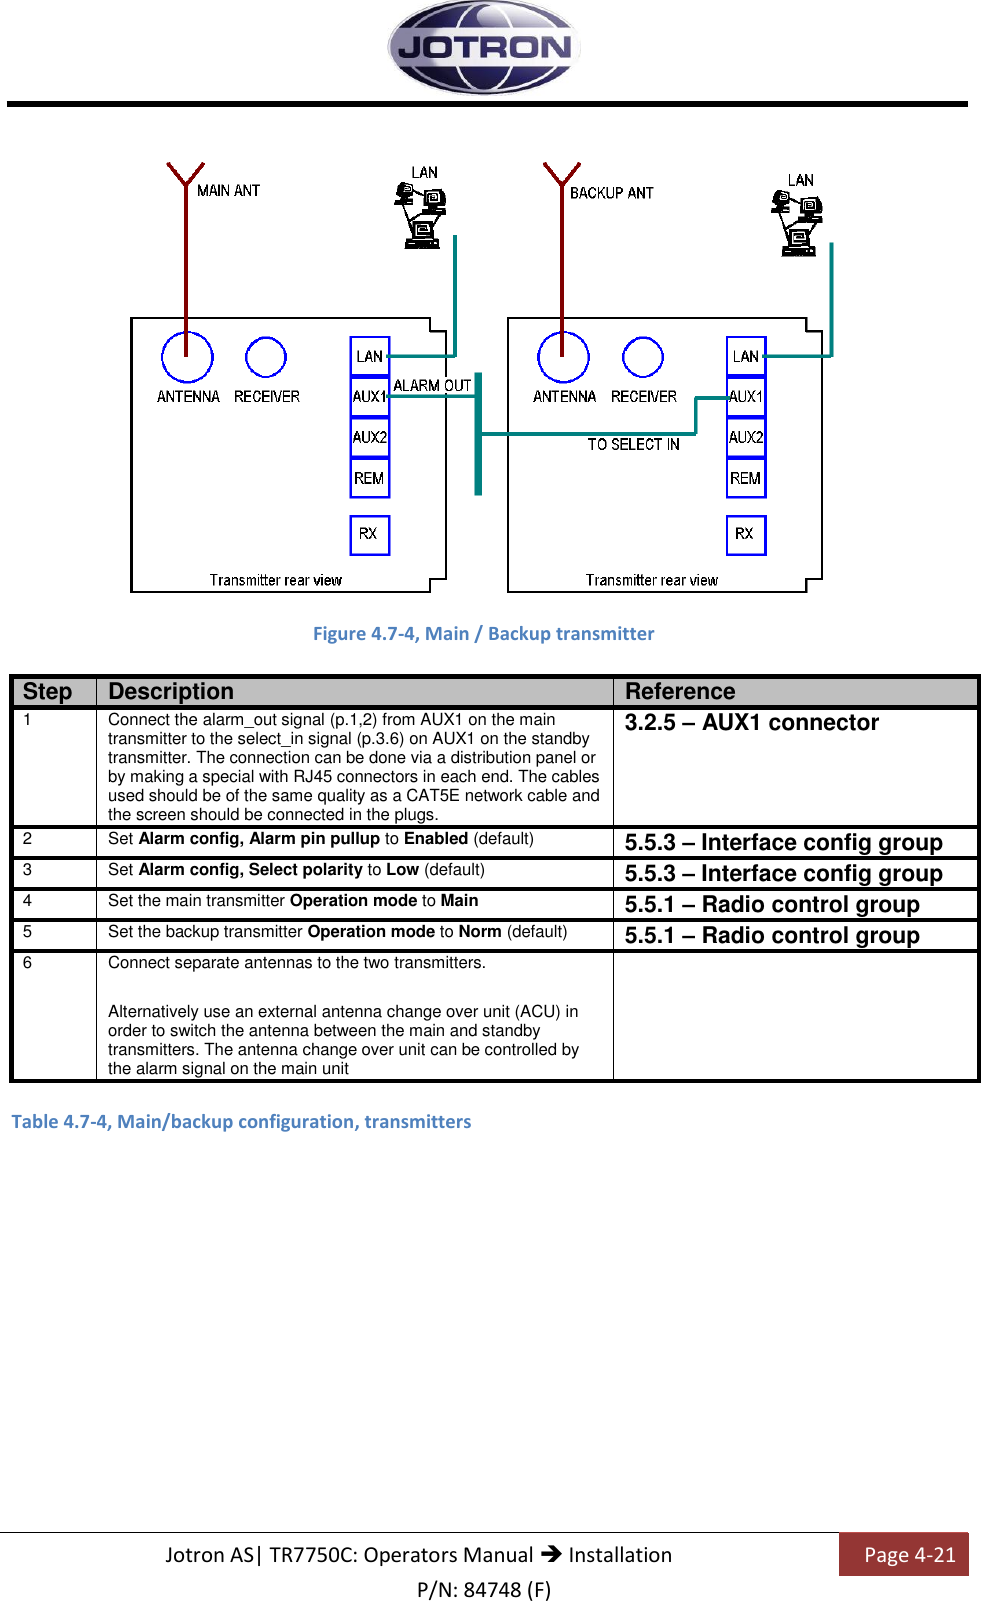   Jotron AS| TR7750C: Operators Manual  Installation Page 4-21 P/N: 84748 (F)   Figure 4.7-4, Main / Backup transmitter  Step Description Reference 1 Connect the alarm_out signal (p.1,2) from AUX1 on the main transmitter to the select_in signal (p.3.6) on AUX1 on the standby transmitter. The connection can be done via a distribution panel or by making a special with RJ45 connectors in each end. The cables used should be of the same quality as a CAT5E network cable and the screen should be connected in the plugs. 3.2.5 – AUX1 connector 2 Set Alarm config, Alarm pin pullup to Enabled (default) 5.5.3 – Interface config group 3 Set Alarm config, Select polarity to Low (default) 5.5.3 – Interface config group 4 Set the main transmitter Operation mode to Main  5.5.1 – Radio control group 5 Set the backup transmitter Operation mode to Norm (default) 5.5.1 – Radio control group 6 Connect separate antennas to the two transmitters. Alternatively use an external antenna change over unit (ACU) in order to switch the antenna between the main and standby transmitters. The antenna change over unit can be controlled by the alarm signal on the main unit   Table 4.7-4, Main/backup configuration, transmitters  